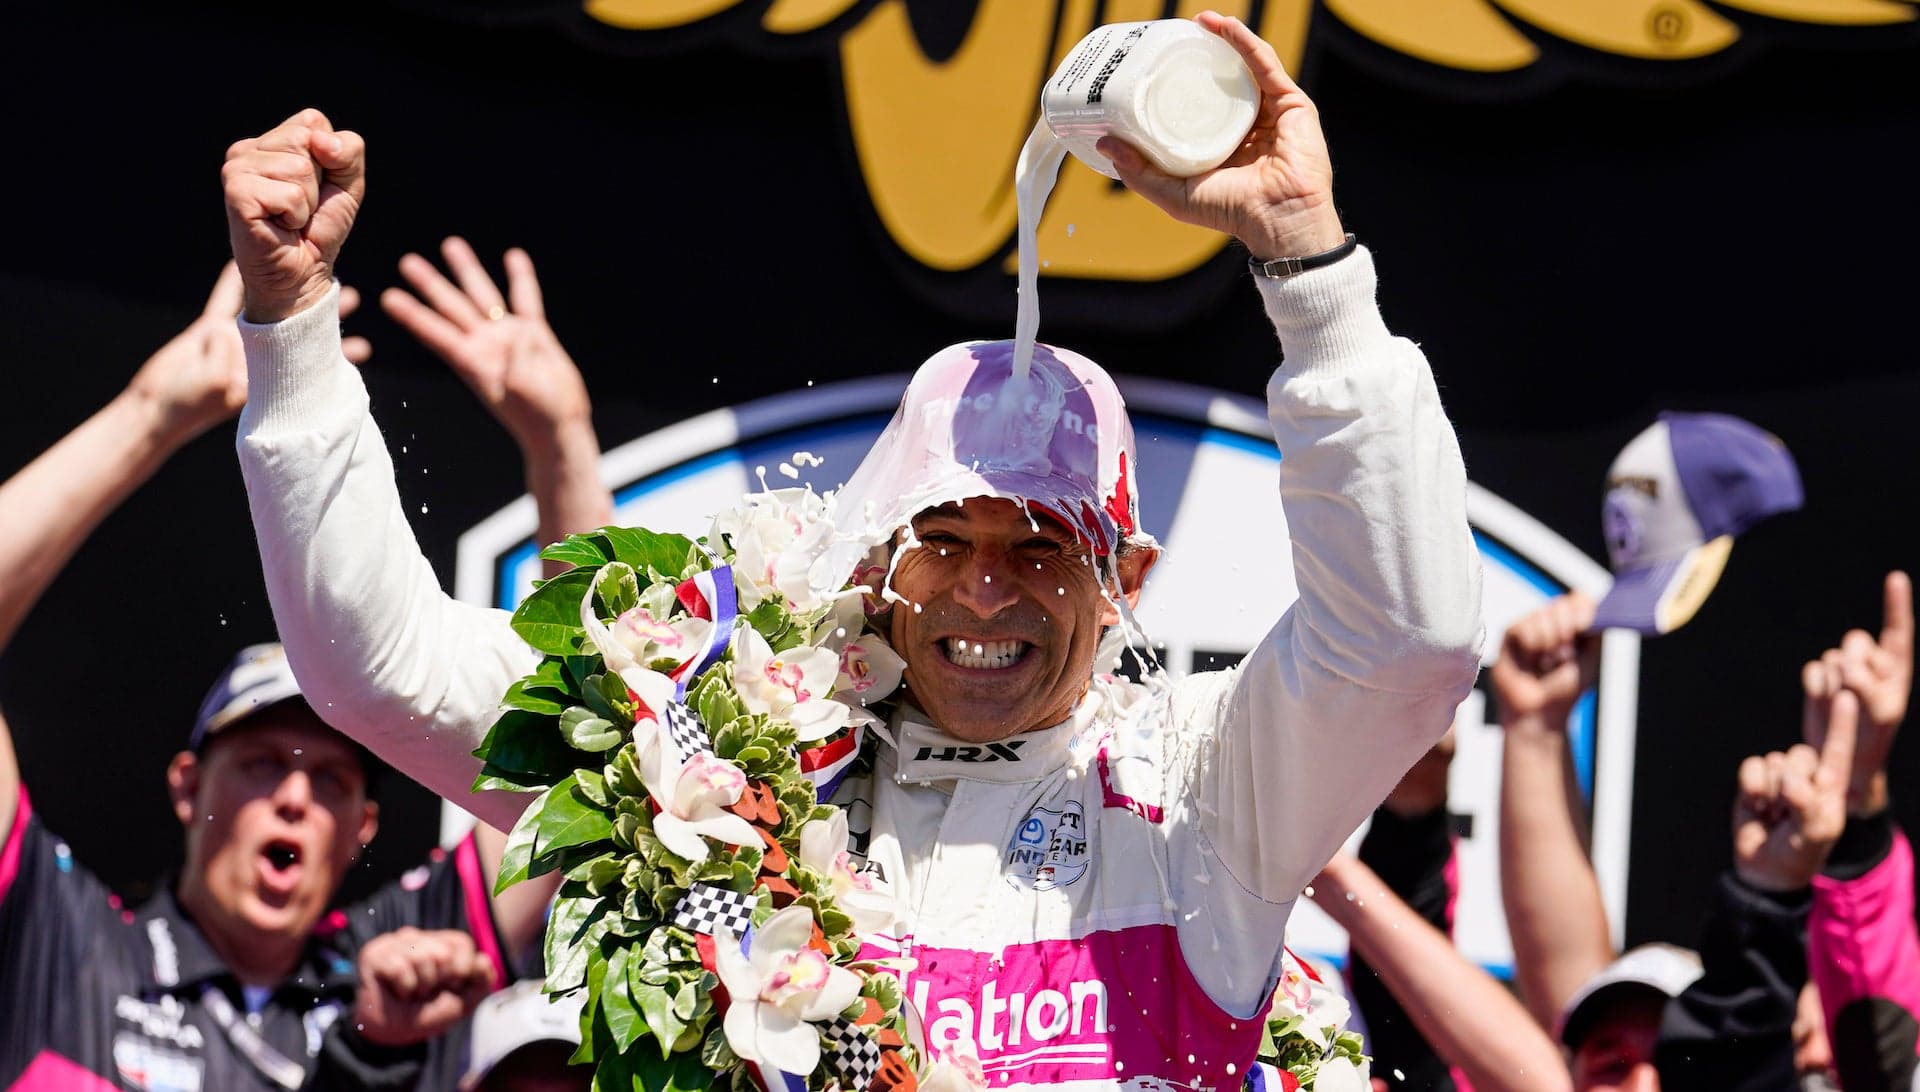 2021 Indy 500: At 46, Helio Castroneves Is Now a Four-Time Winner